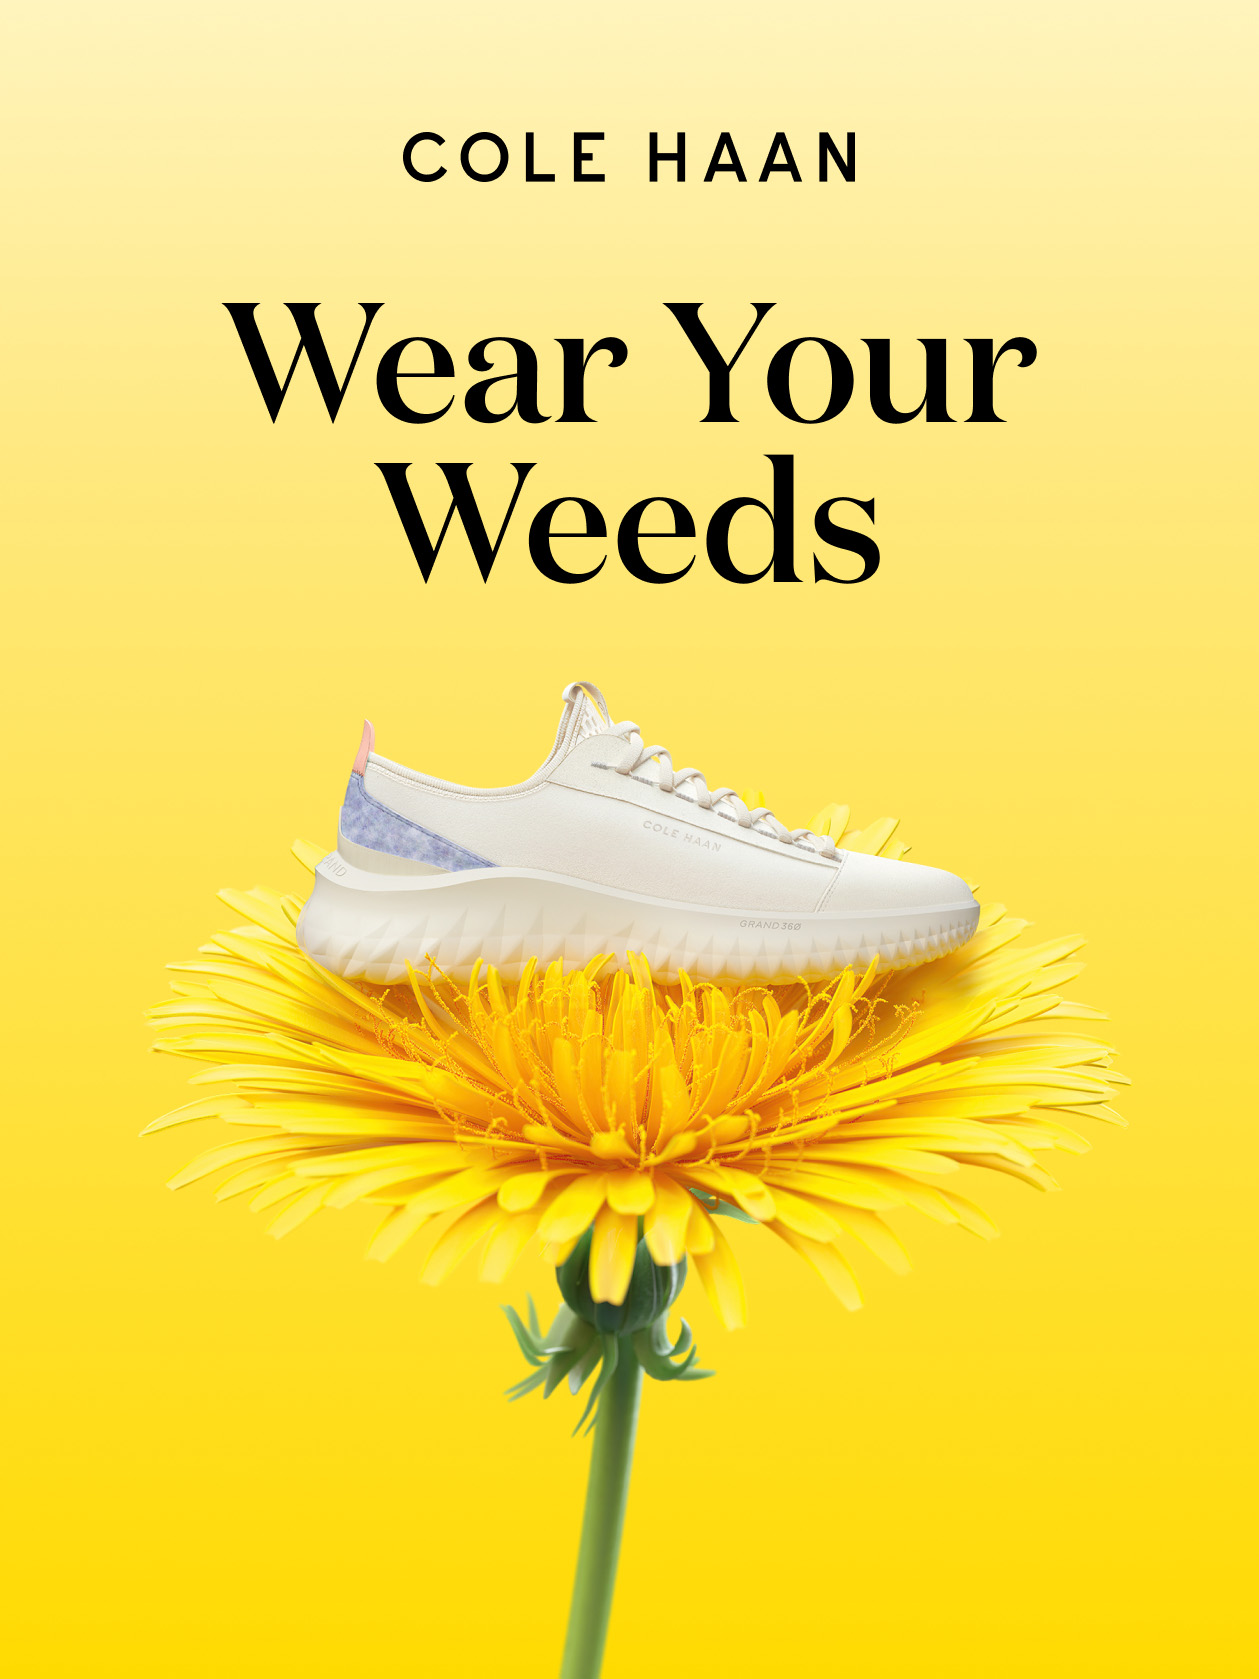 Cole Haan's First Sustainable Shoe Is Made From Dandelions